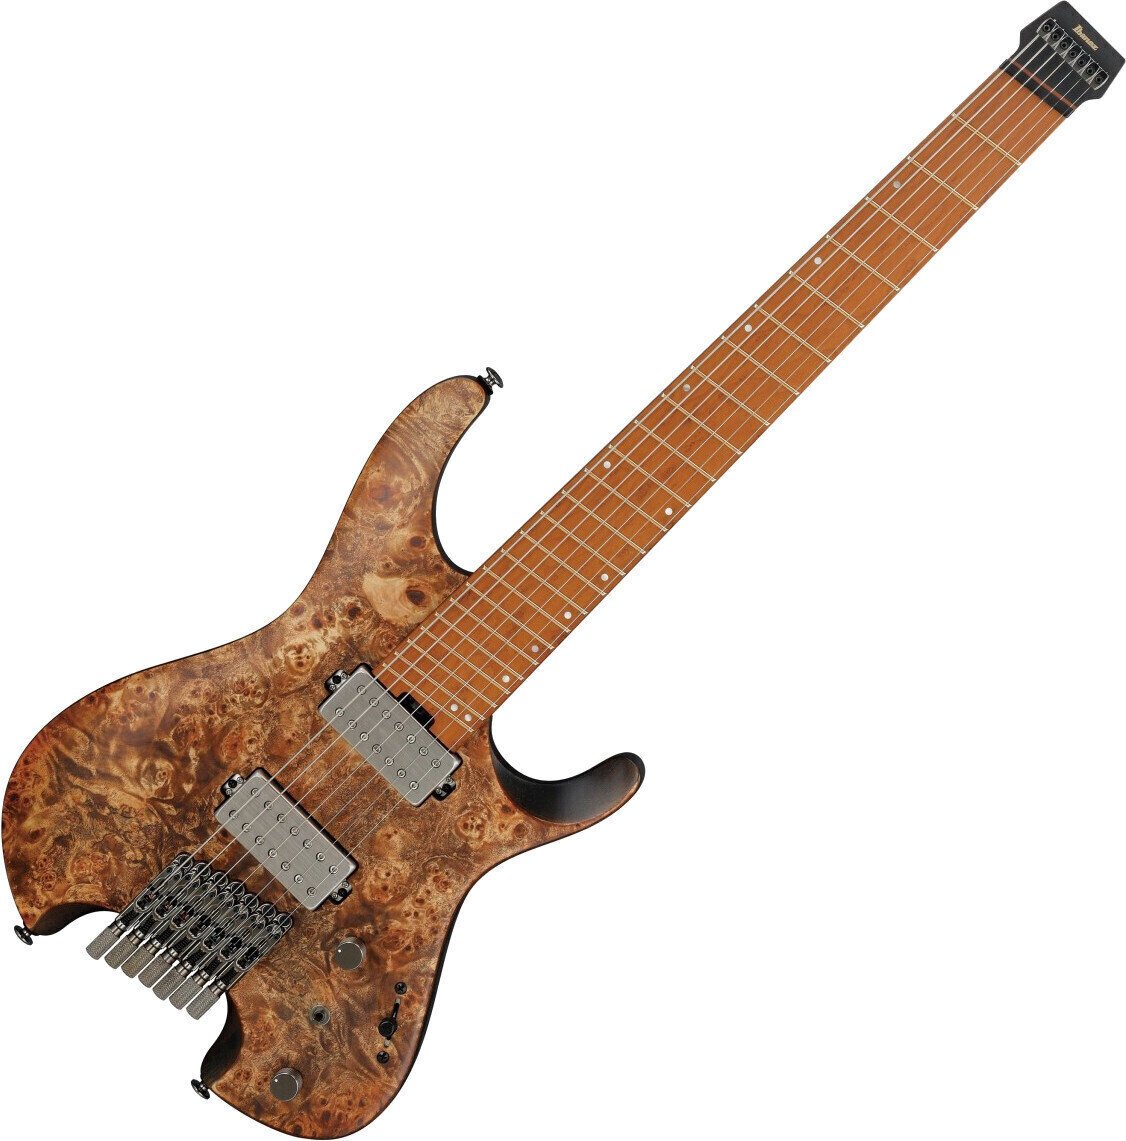 Headless Gitarre Ibanez QX527PB-ABS Antique Brown Stained